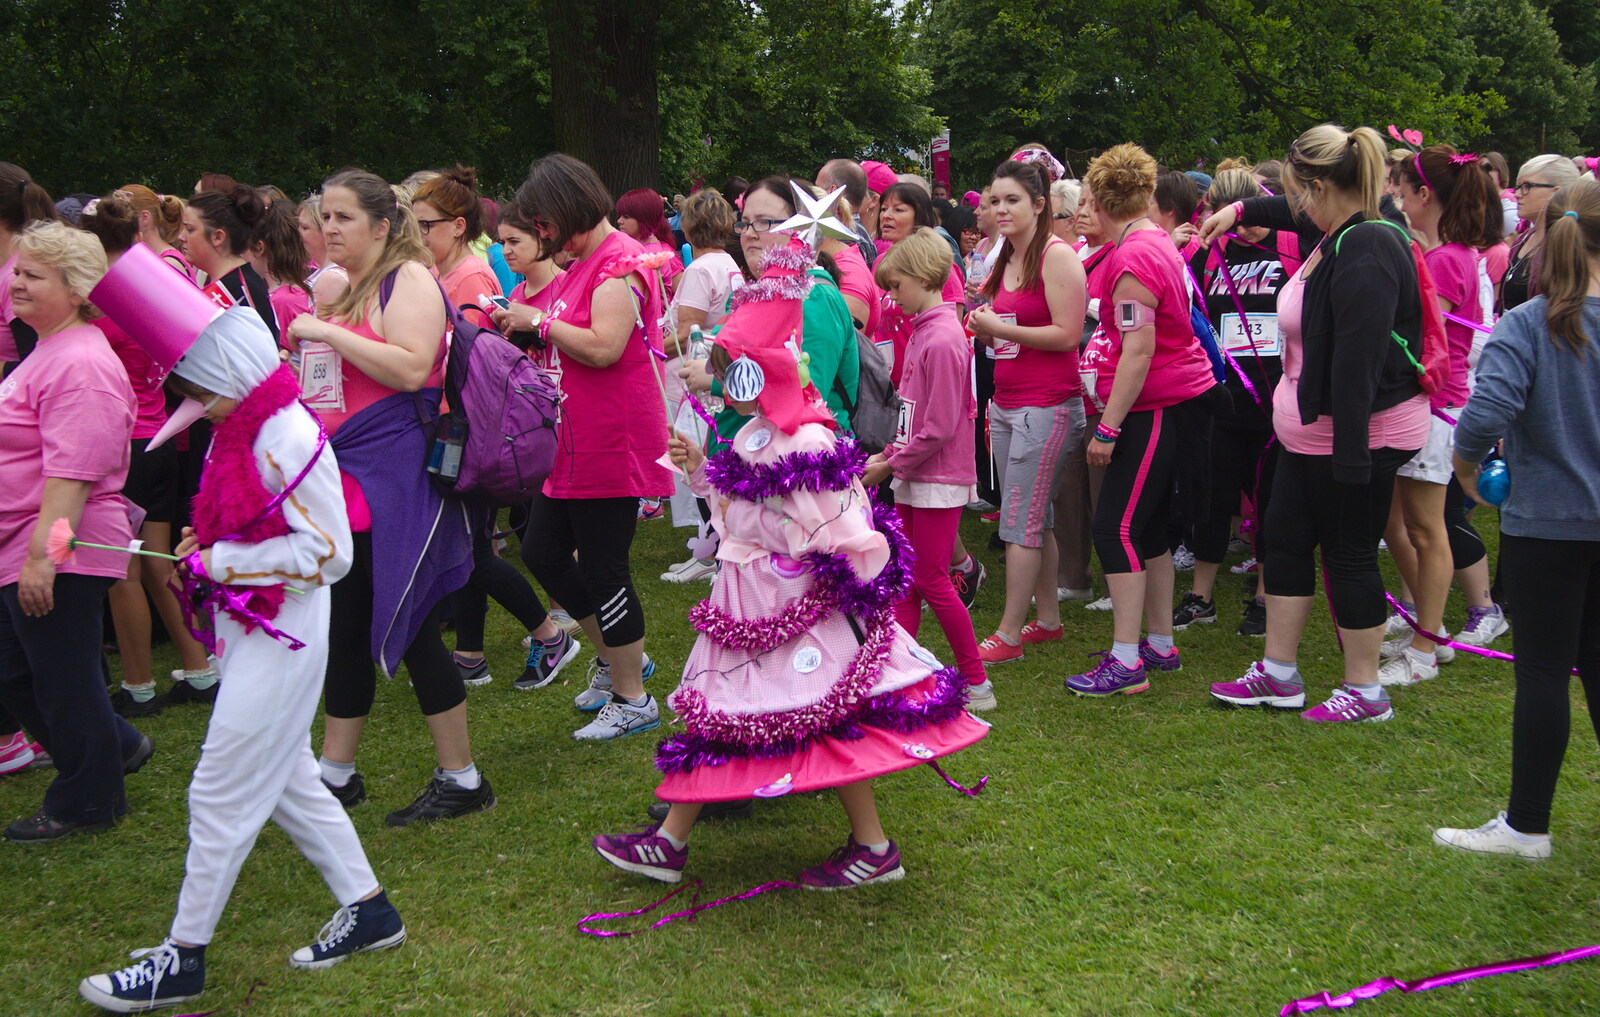 A girl in a Christmas Tree costume from Isobel's Race For Life, Chantry Park, Ipswich - 11th June 2014